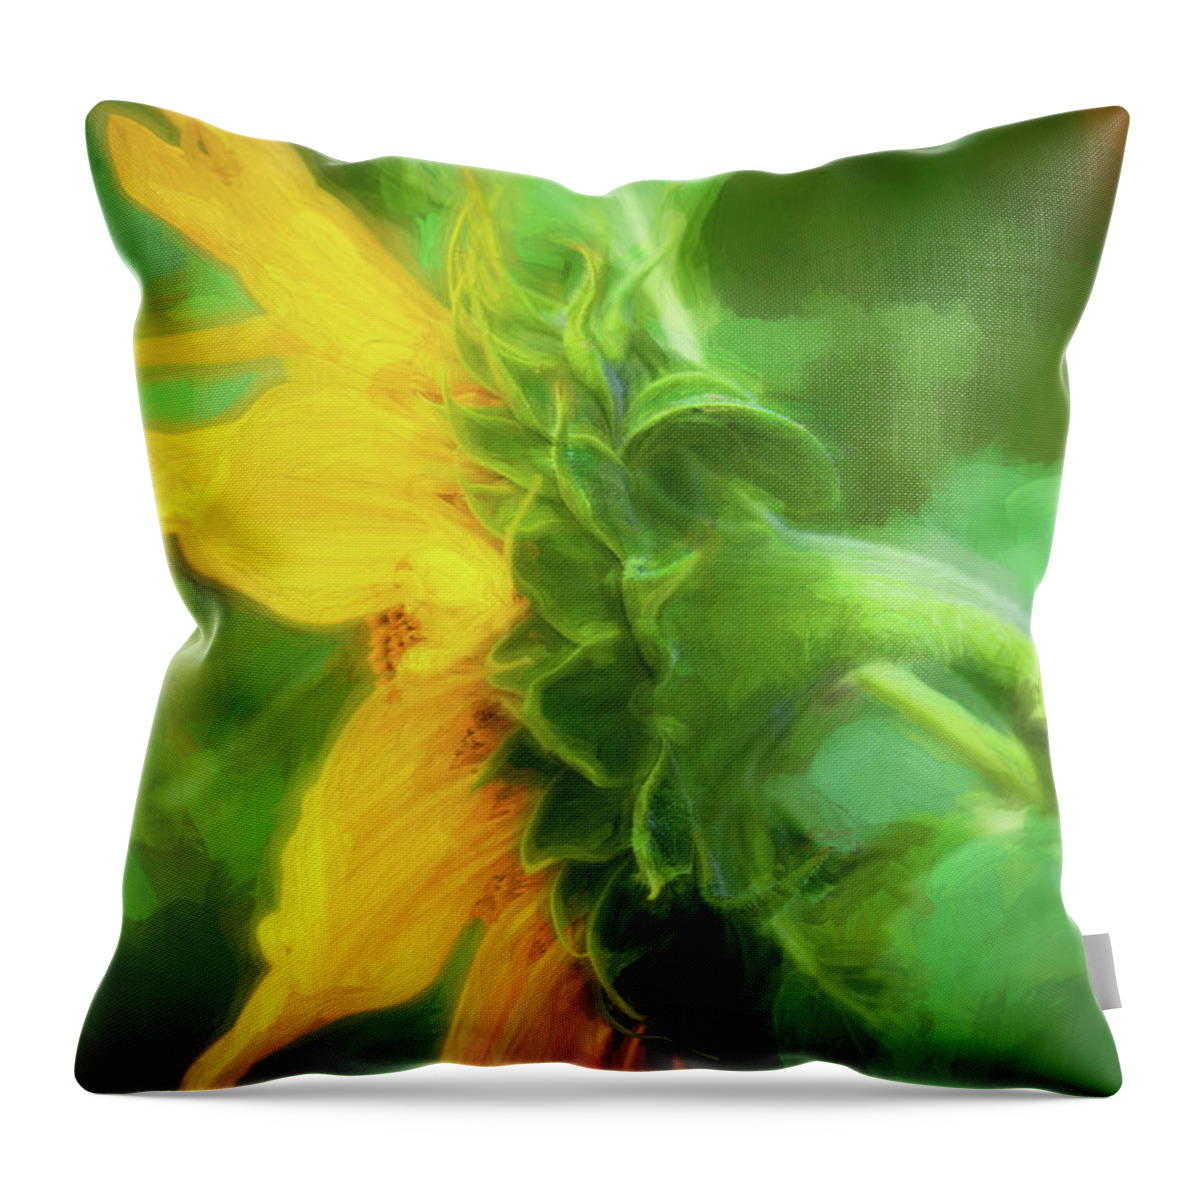 Sunflower Throw Pillow featuring the photograph Sunflowers Helianthus 144 by Rich Franco